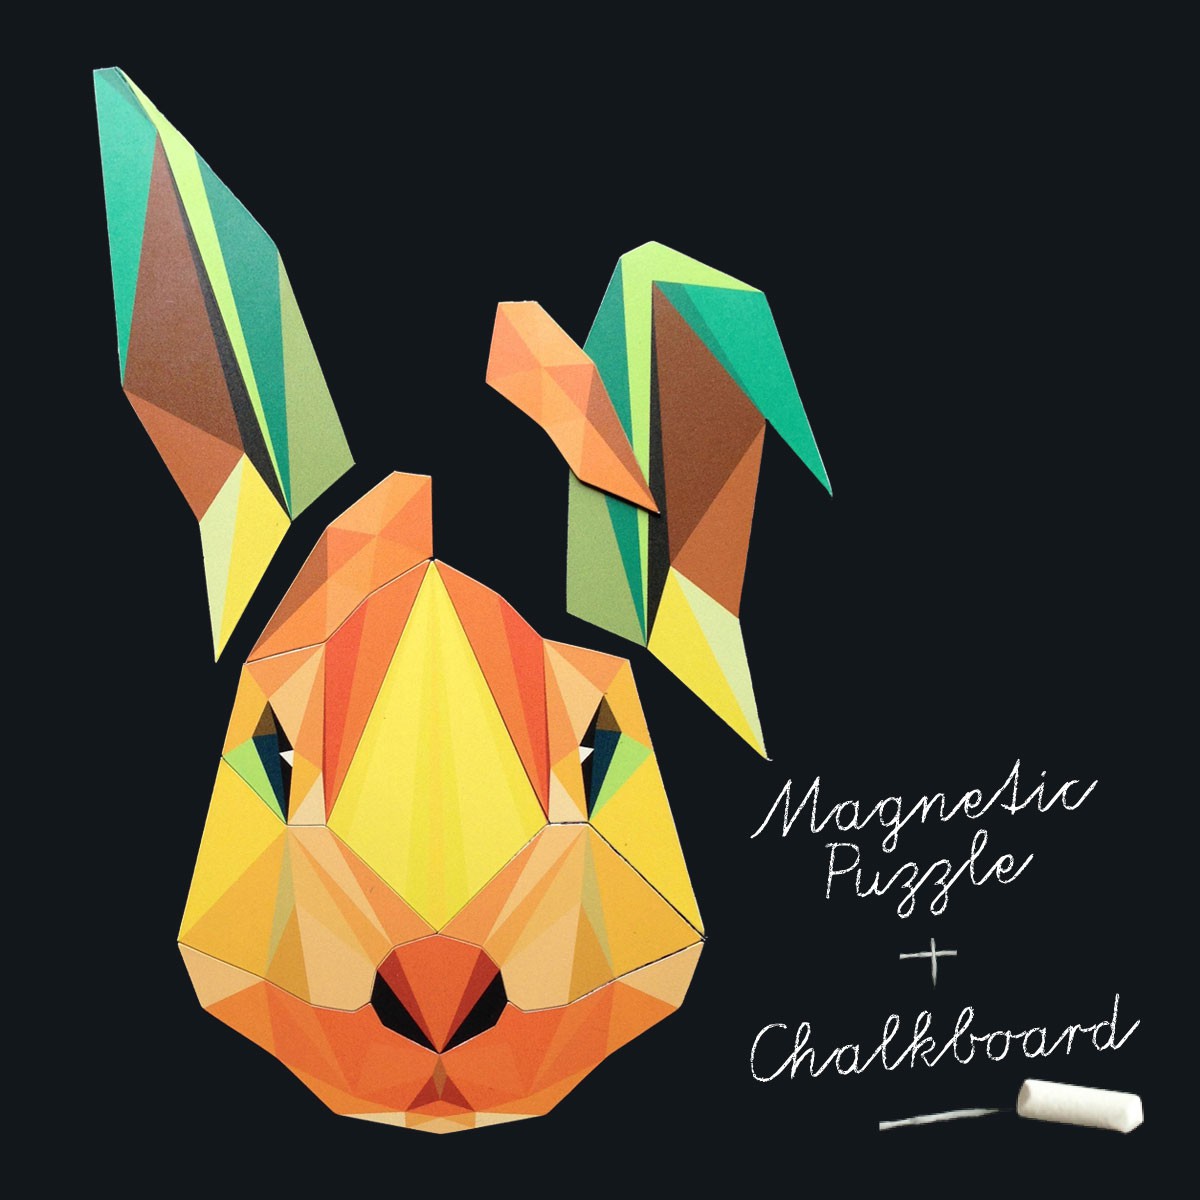 Mag Puzzle Rabbit Chalkboard Wallpaper Groovy Mags